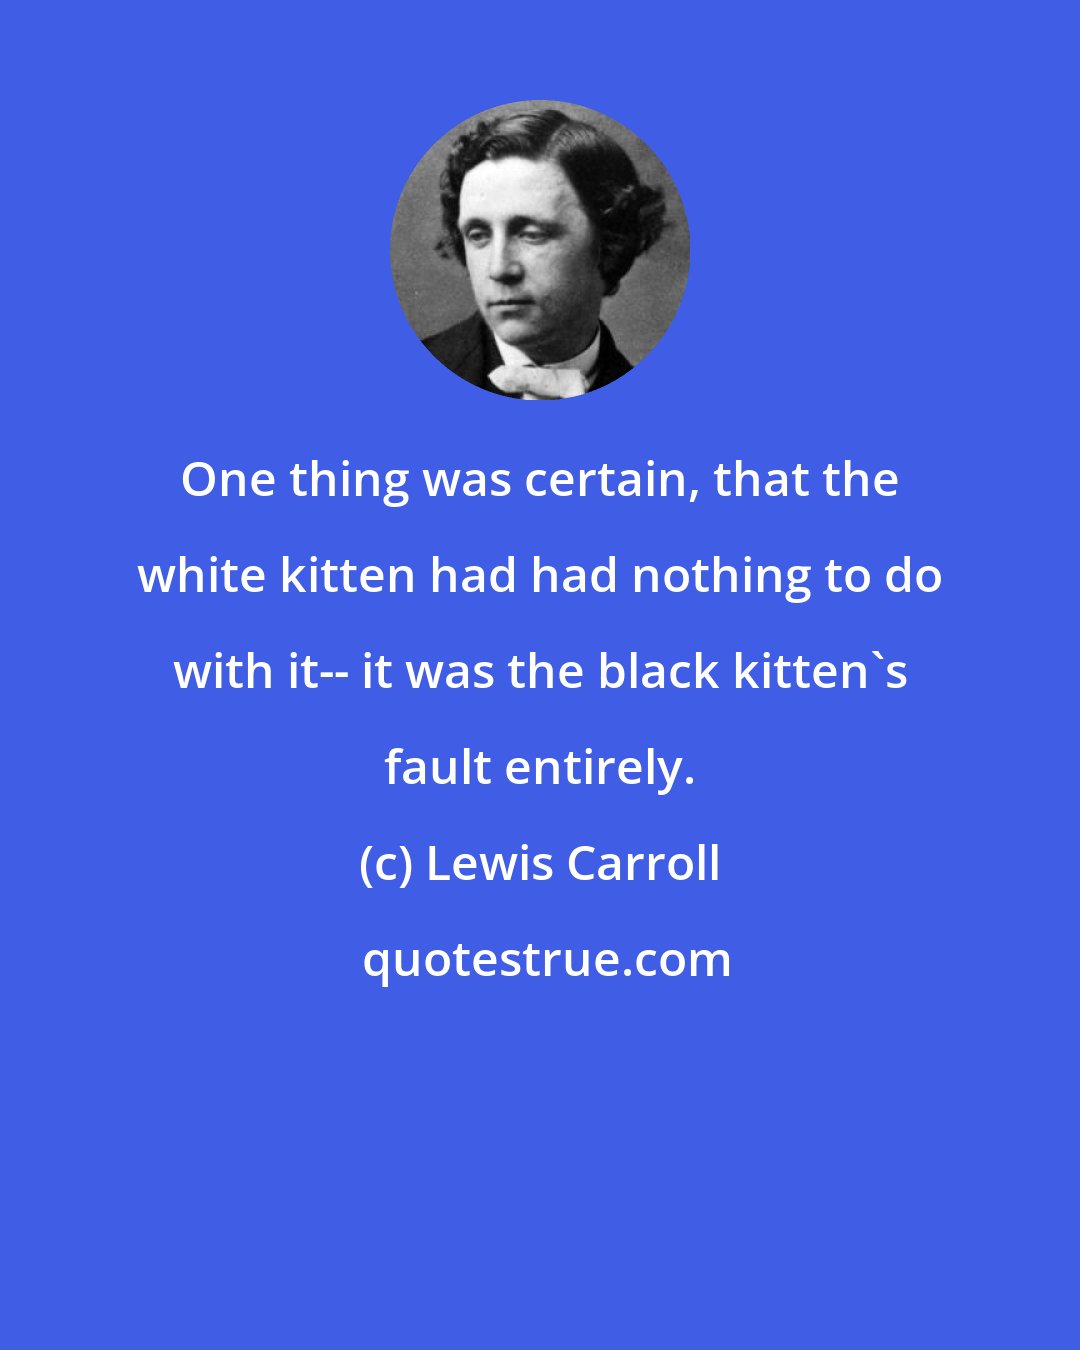 Lewis Carroll: One thing was certain, that the white kitten had had nothing to do with it-- it was the black kitten's fault entirely.